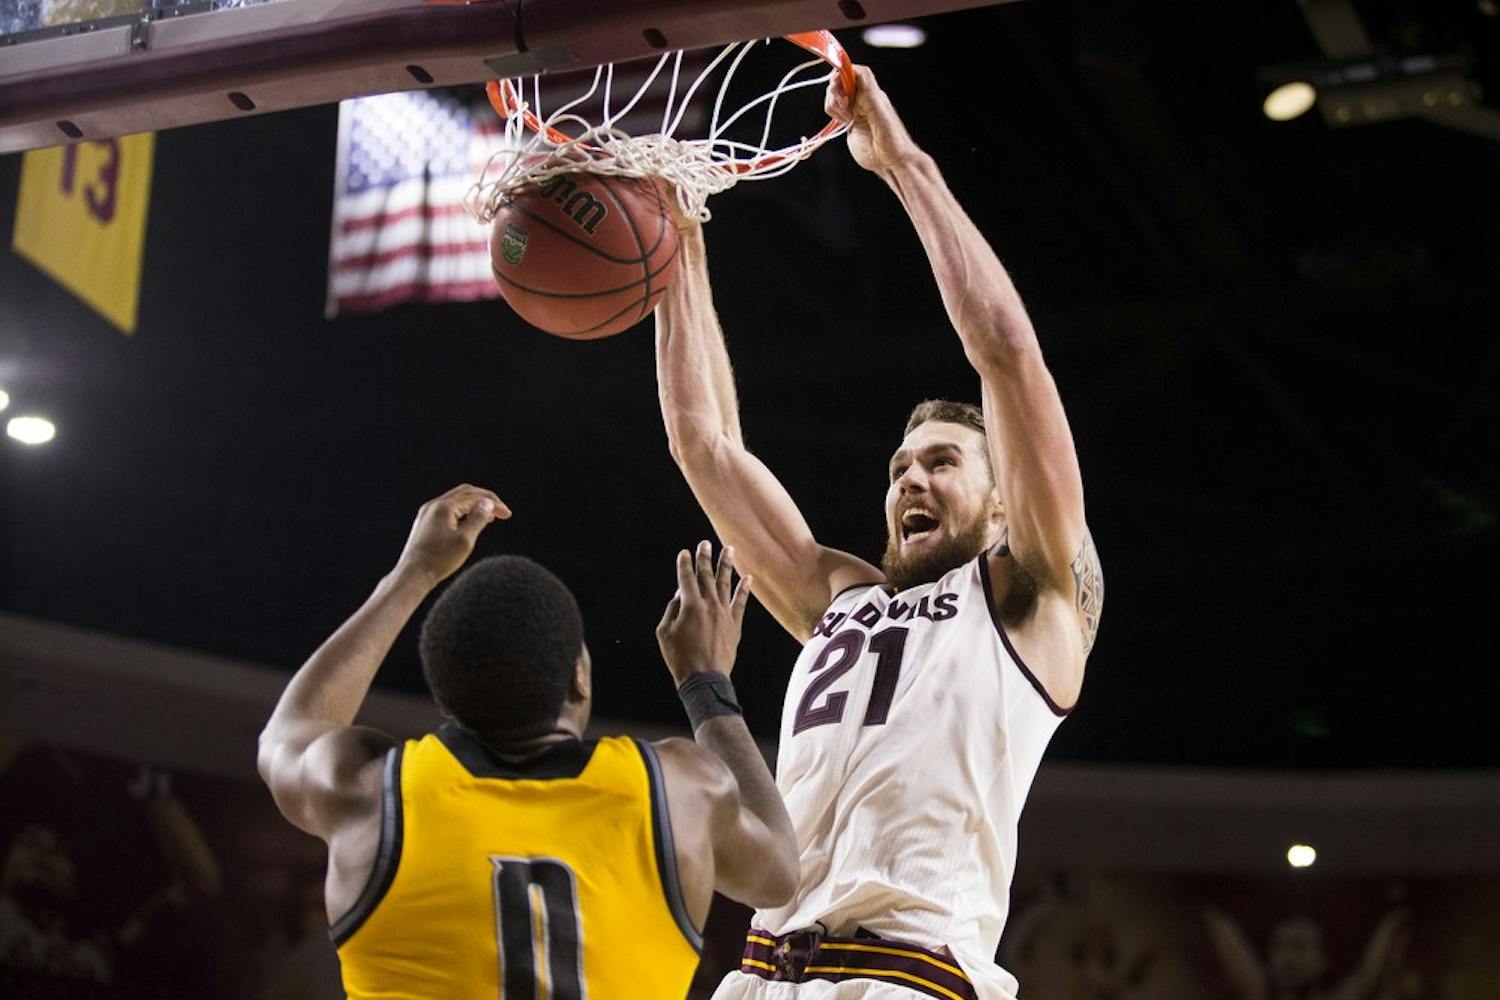 Senior center Eric Jacobsen dunks over Kennesaw State's Kendrick Ray during the fourth quarter on Wednesday, Nov. 18, 2015, at Wells Fargo Arena in Tempe. The Sun Devils took down the Owls 91-53.